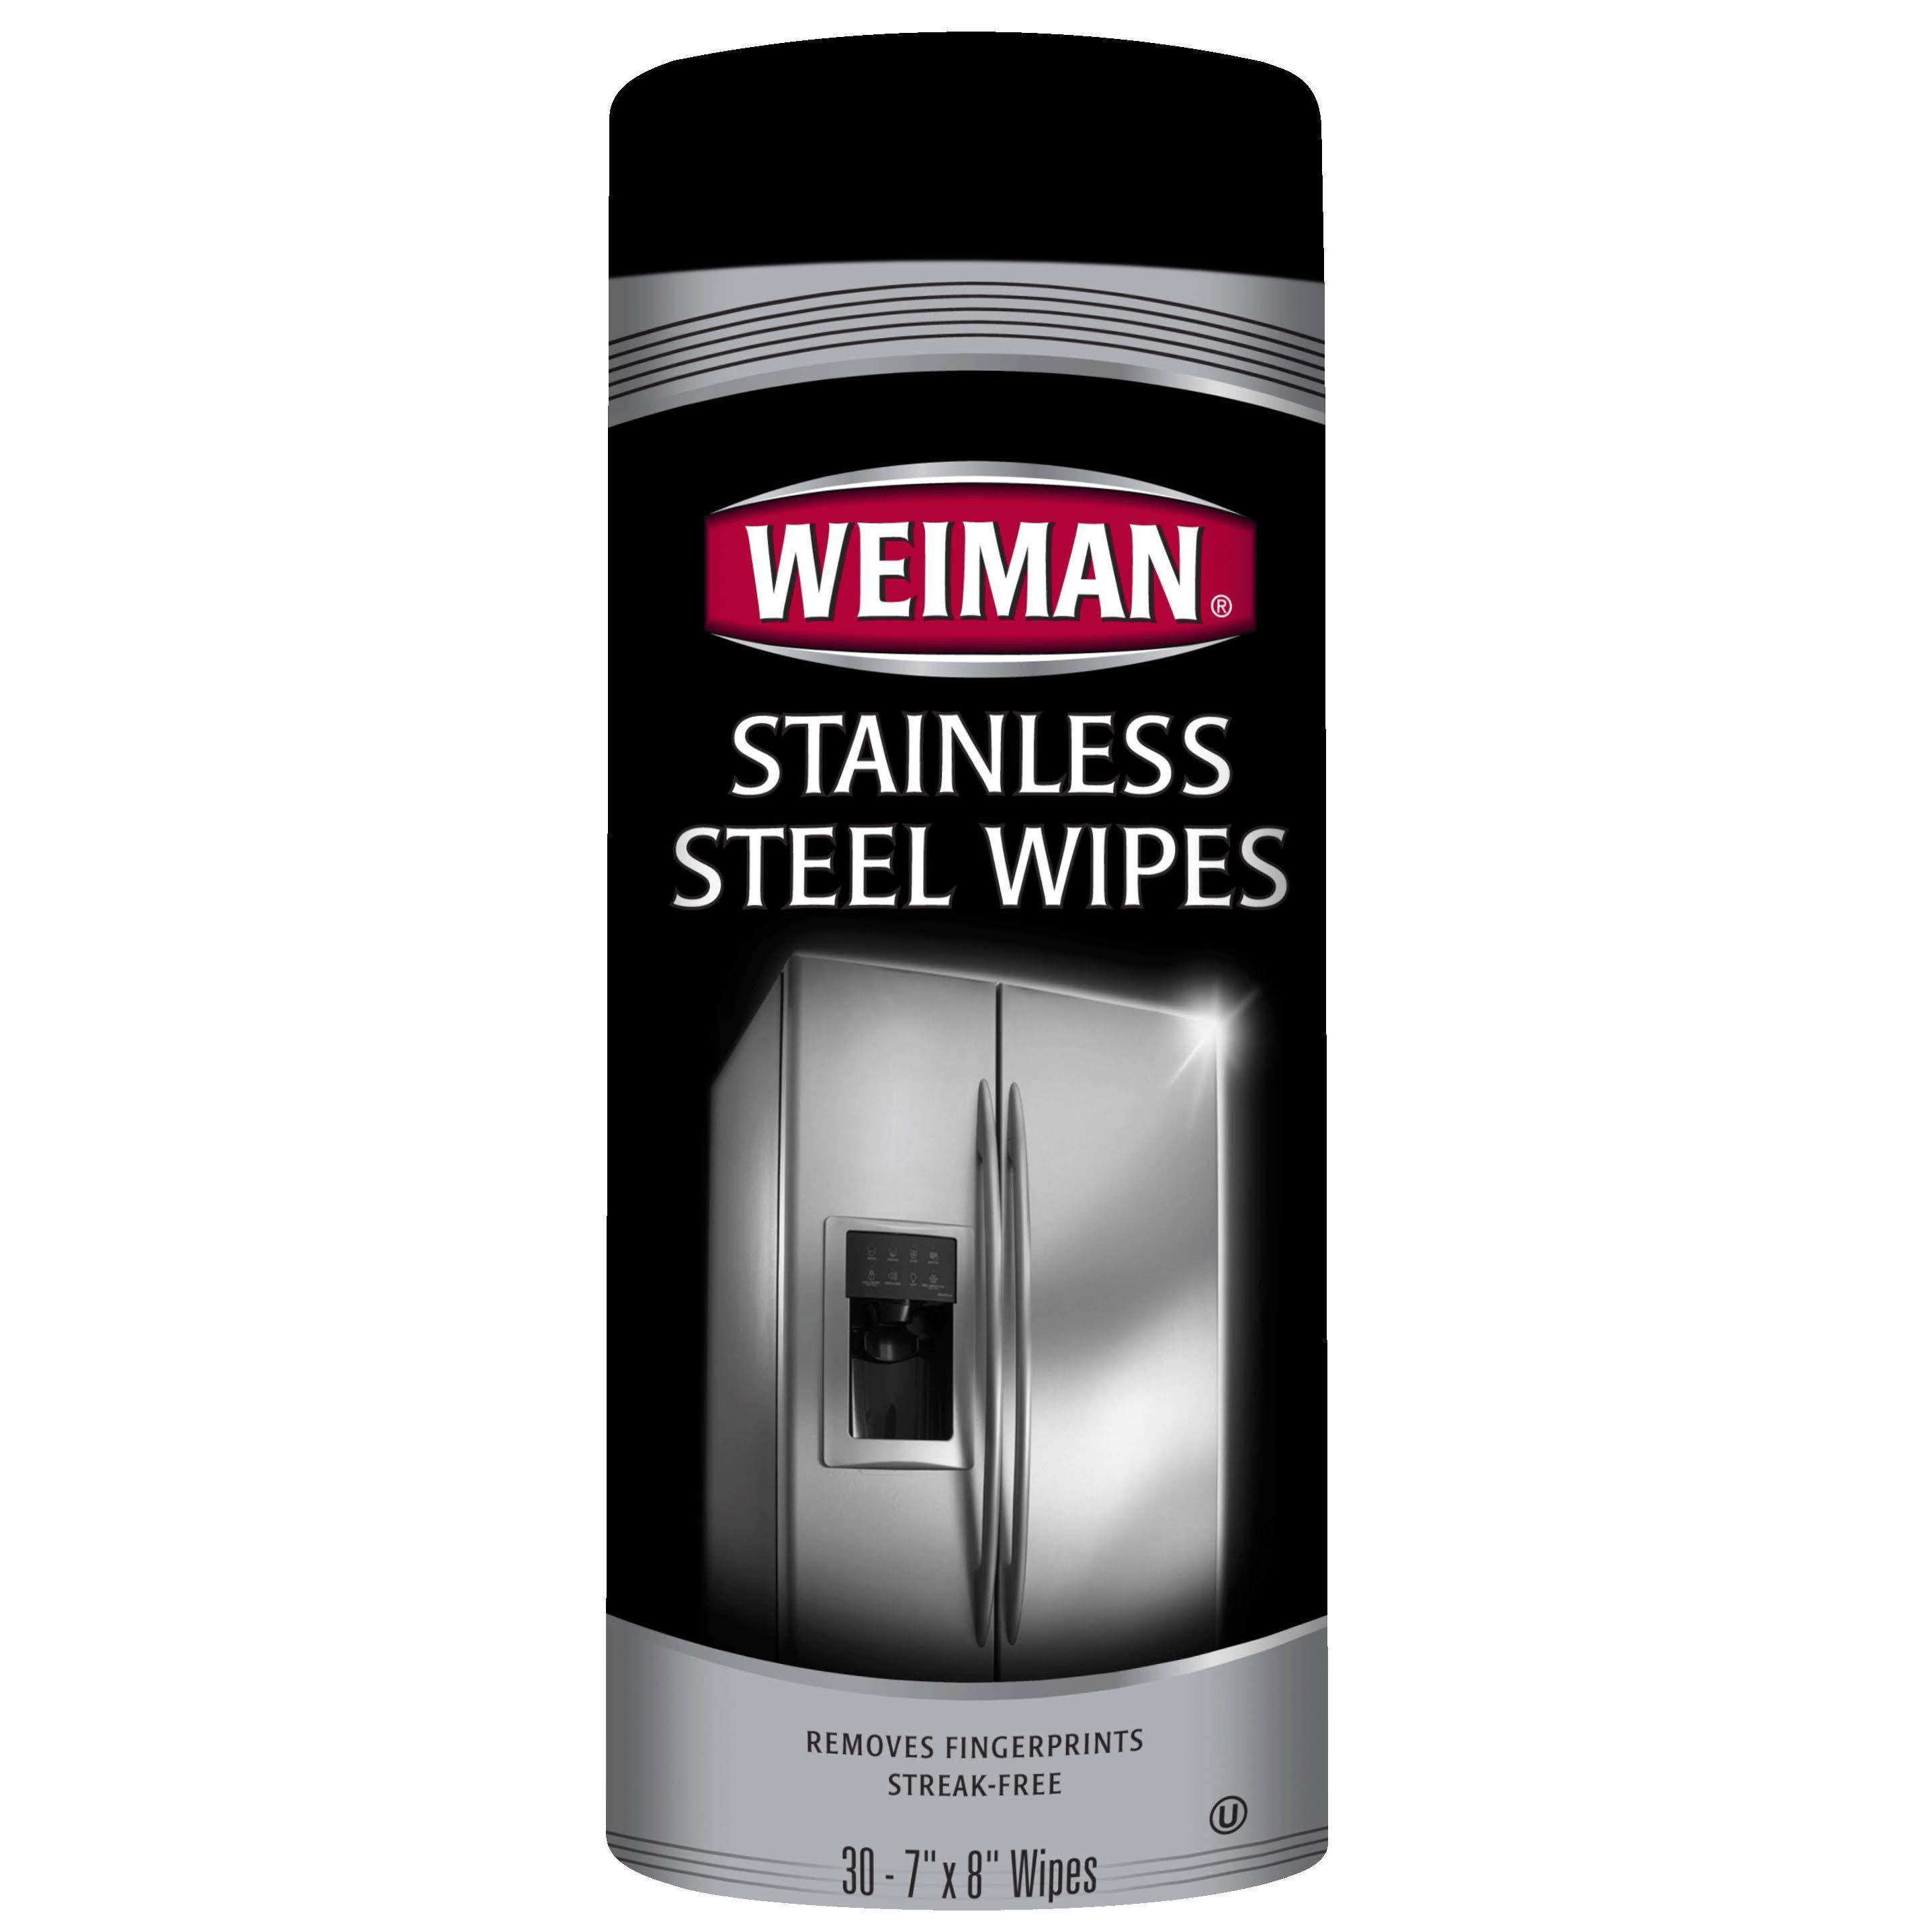 Weiman Stainless Steel Wipes - 30 Pack